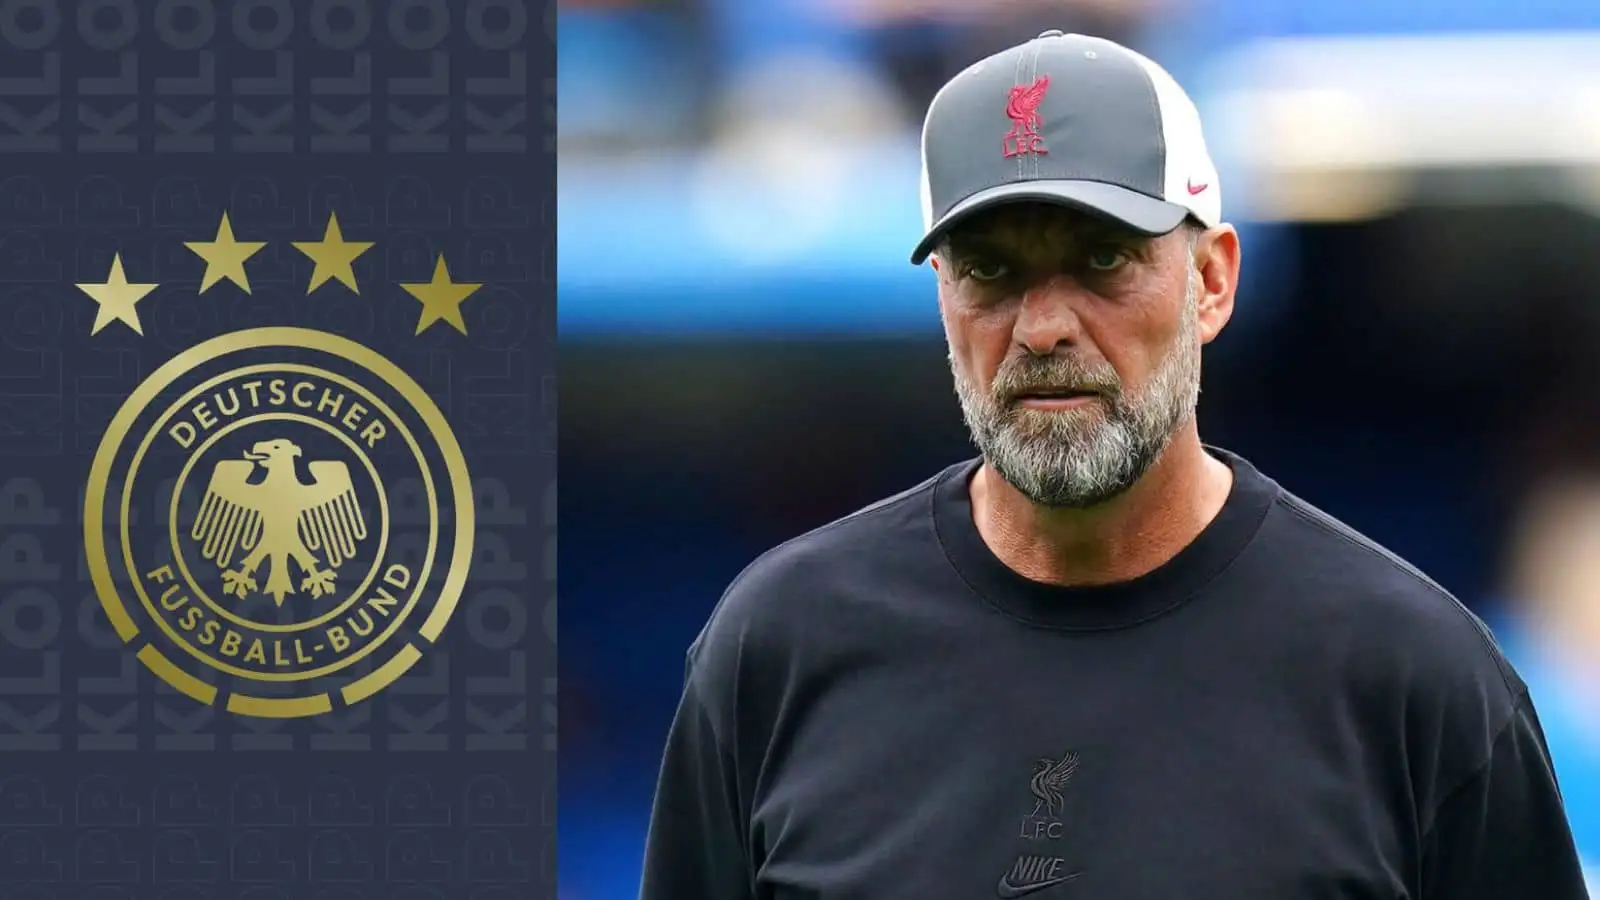 Liverpool manager Jurgen Klopp is being linked once again with the Germany job